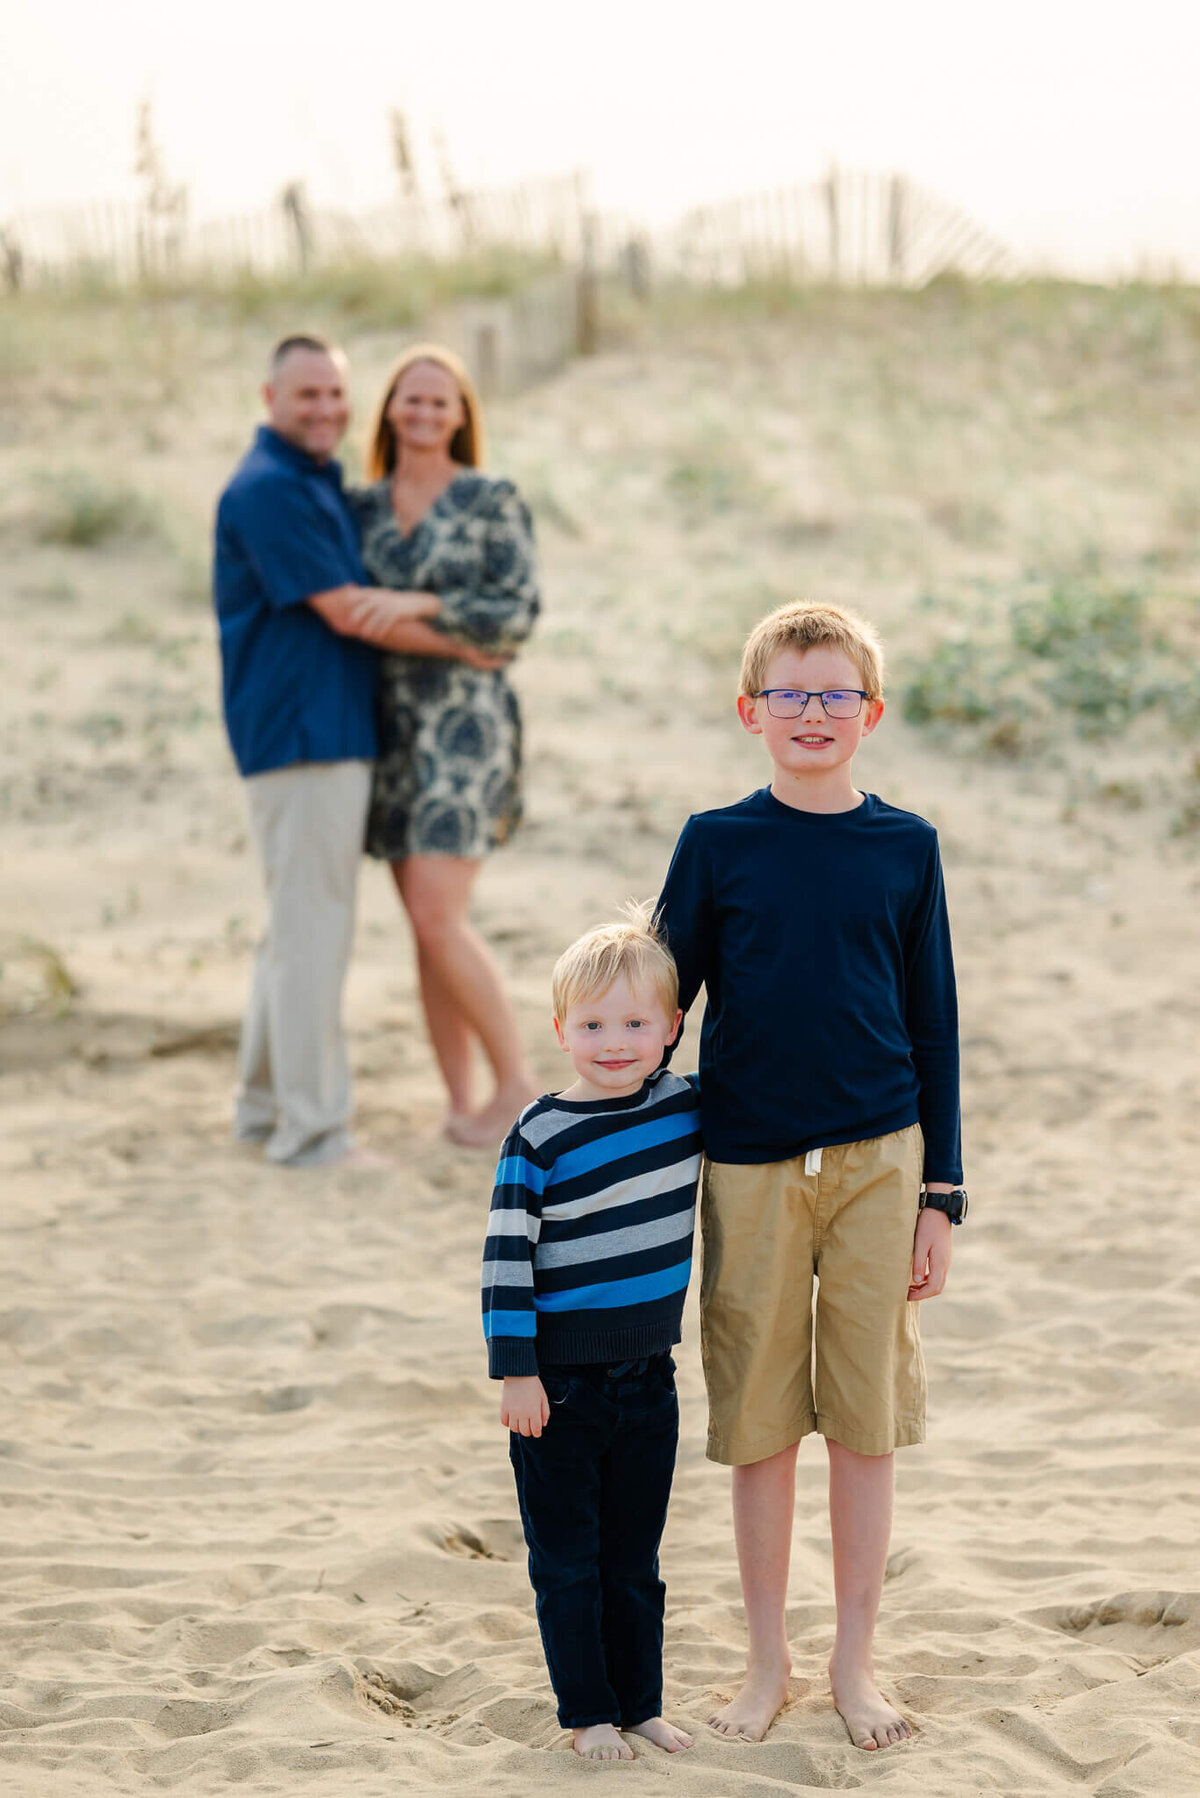 Two brothers put their arms around each other while their parents do the same behind them at a family session at Sandbridge Beach in Virginia Beach.